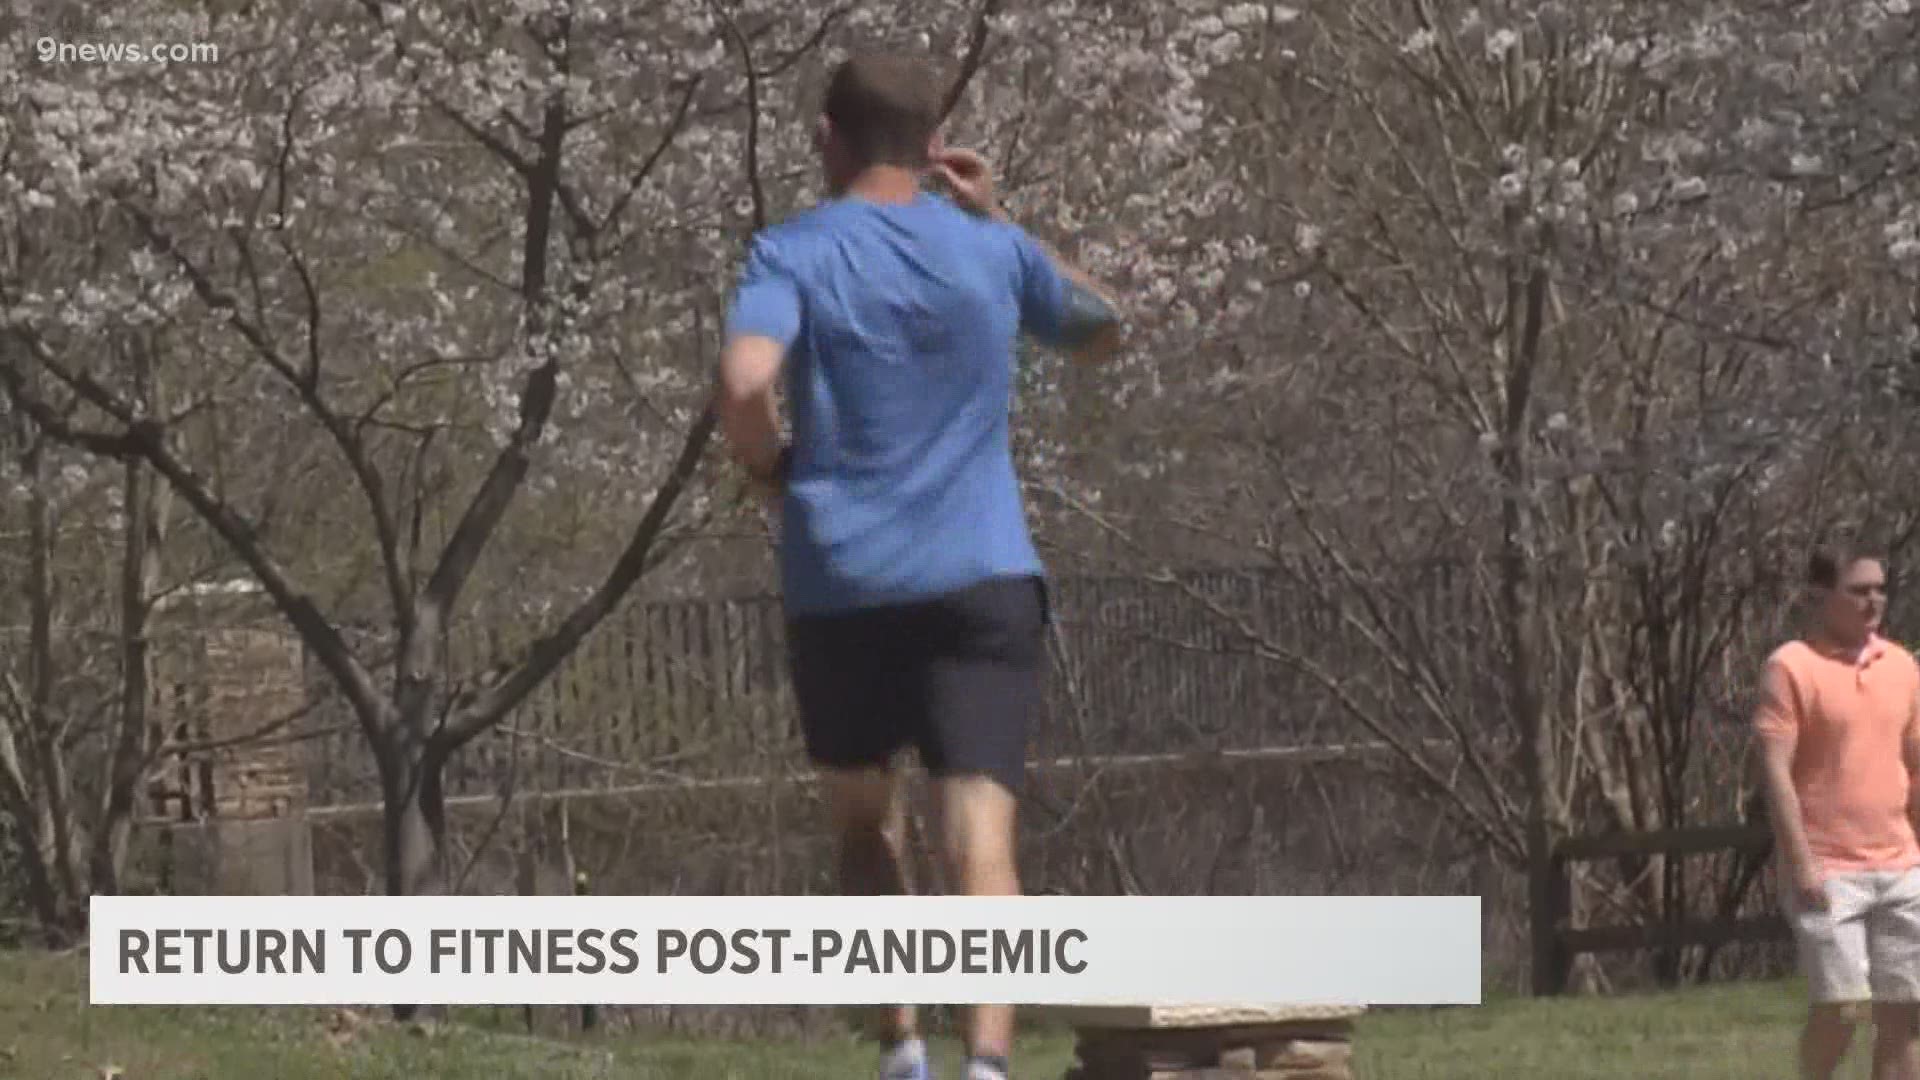 9Health expert Dr. Payal Kohli talks about how to ease back into a fitness routine after the pandemic.